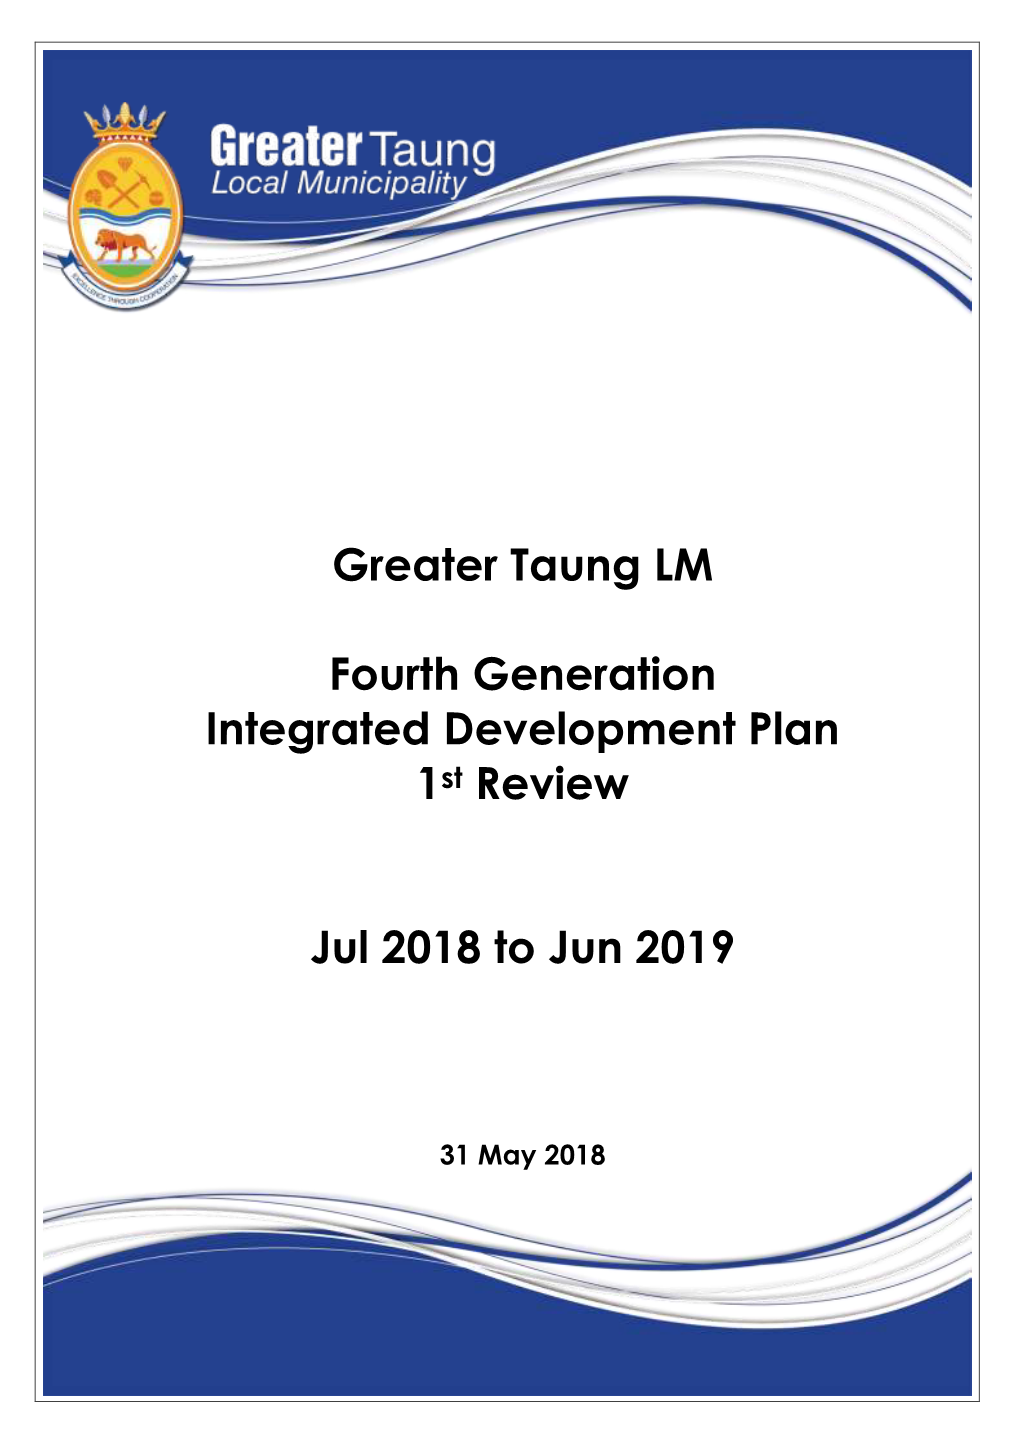 Greater Taung LM Fourth Generation Integrated Development Plan 1St